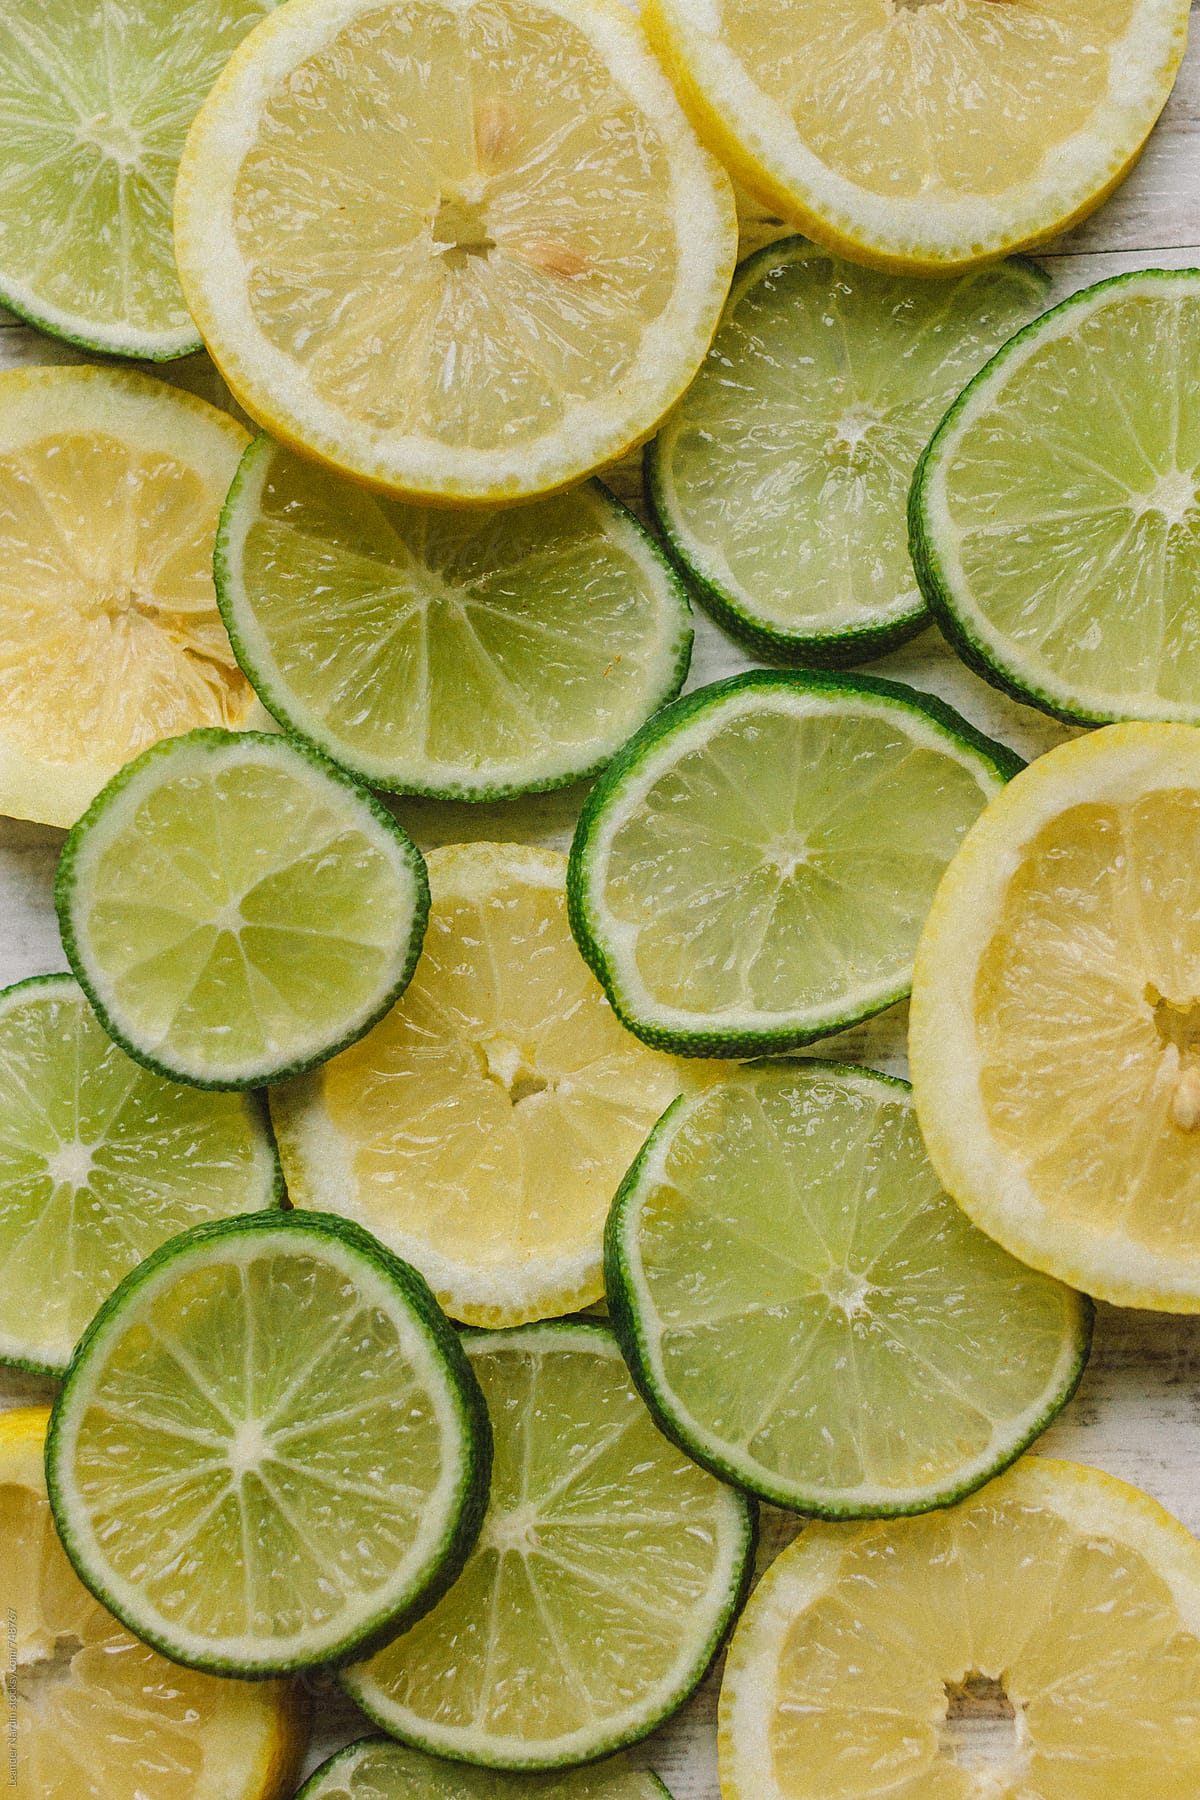 cut slices from lemonades and limes from above